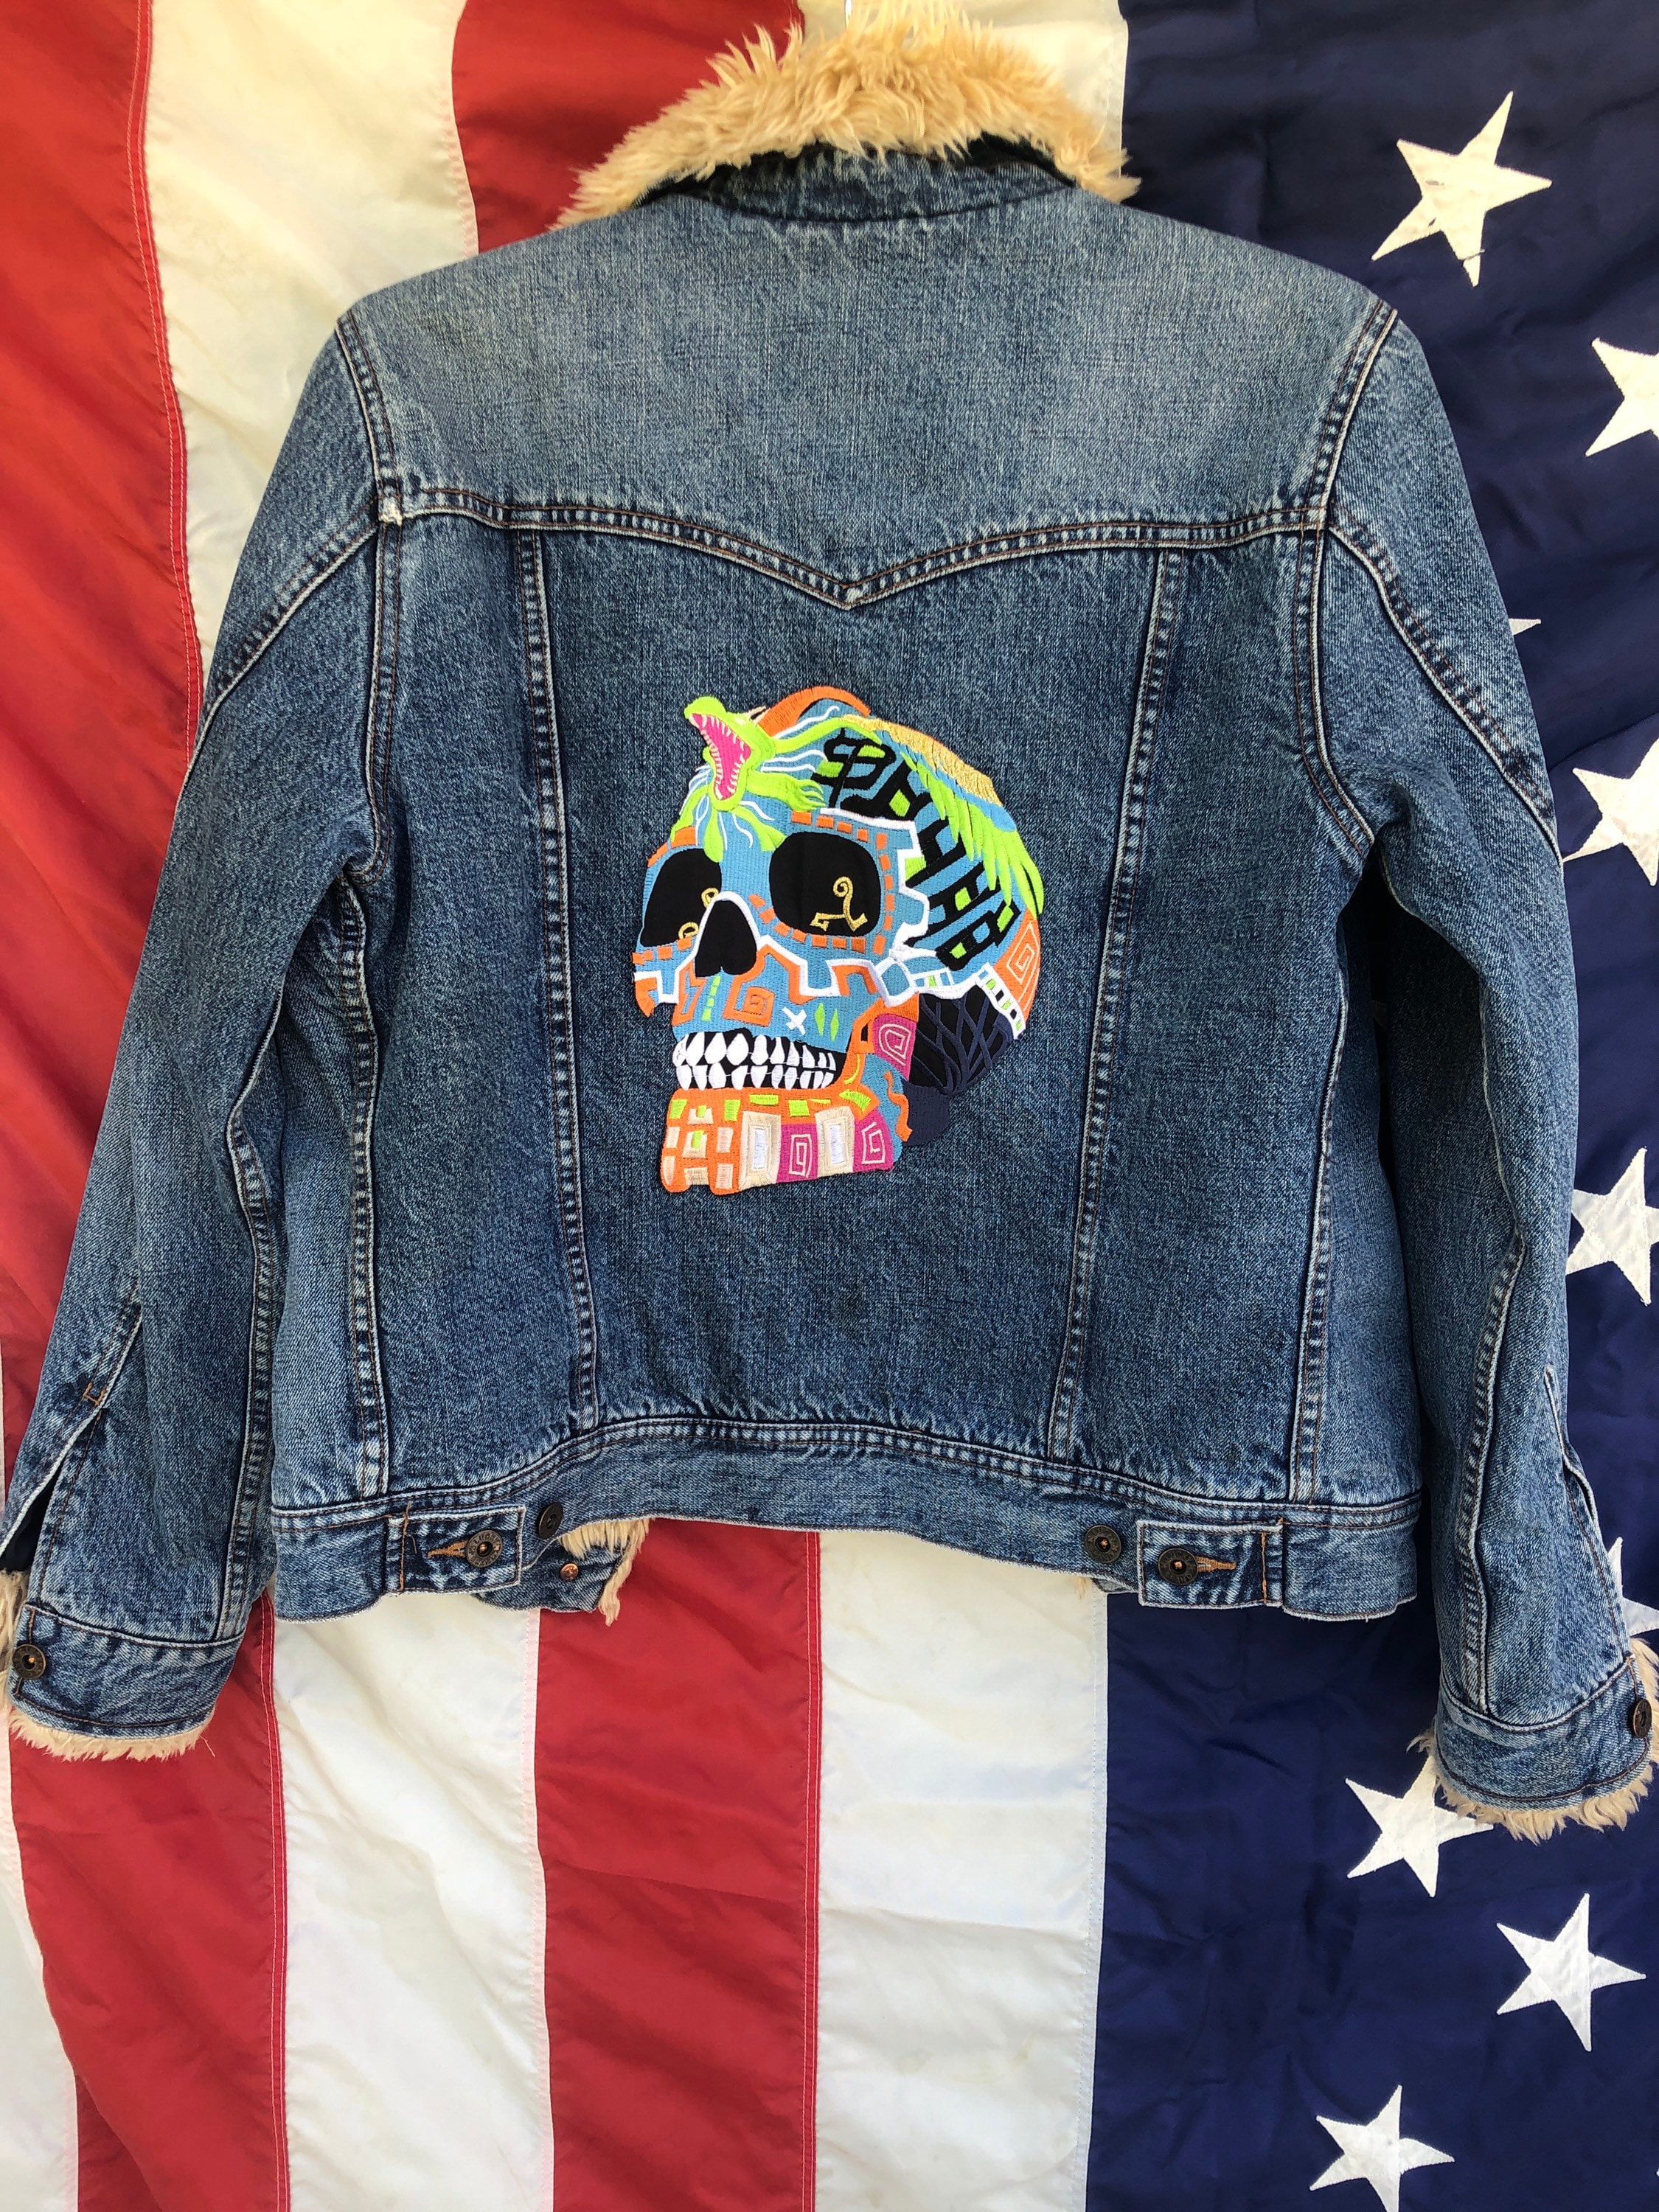 Upcycled Biker Denim Jacket With Patches / Reworked Vintage Biker Denim  Jacket With Patches Men Size XL Unisex Adult 